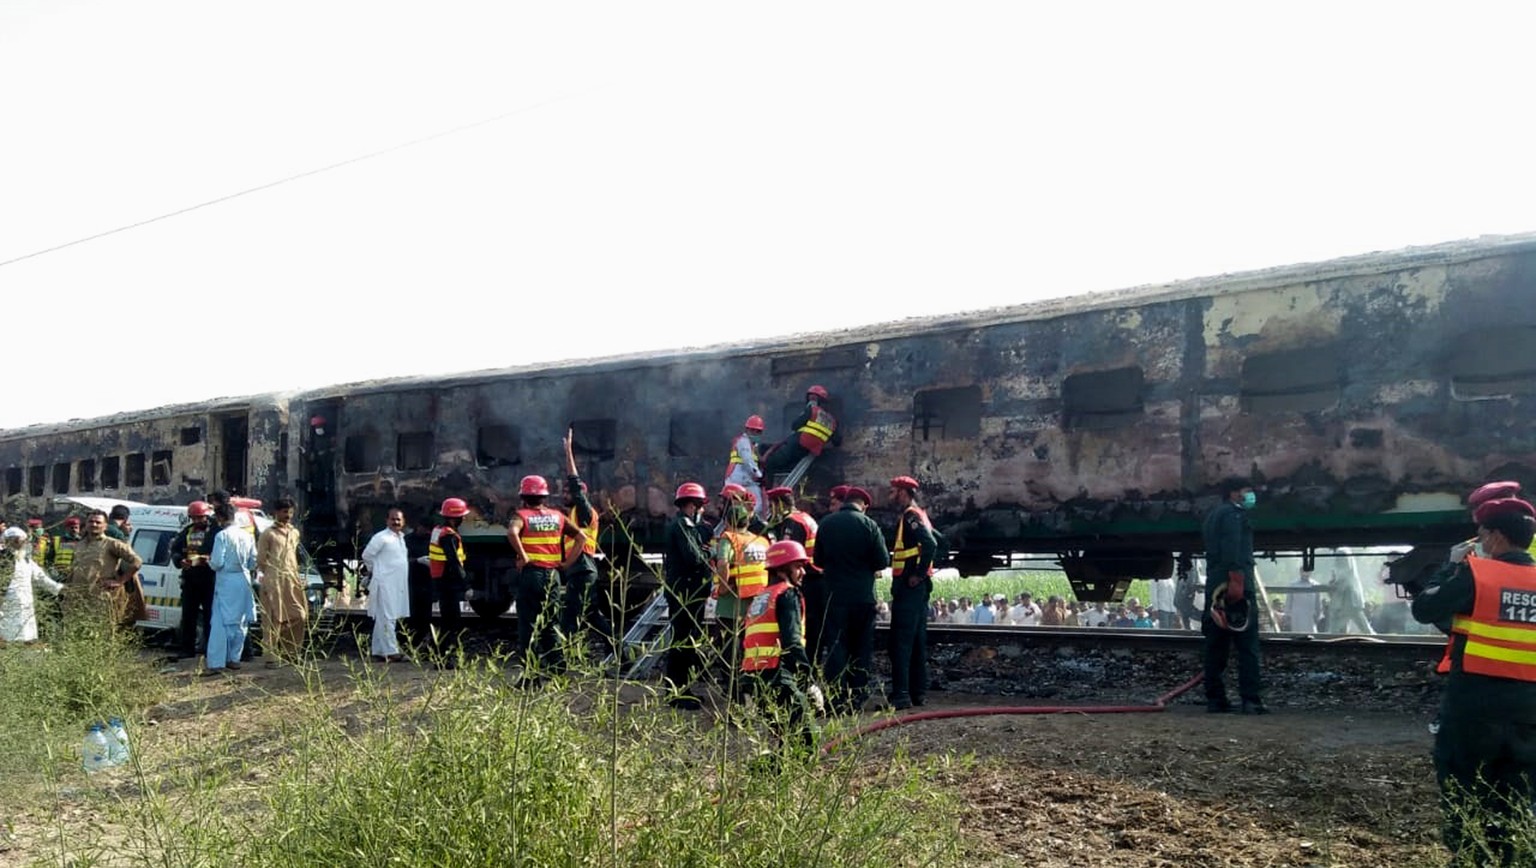 epa07961658 Rescue workers shift the bodies of the victims after a fire engulfed a passenger train near Rahim Yar Khan, Pakistan, 31 October 2019. Dozens were killed and more than 40 others injured af ...